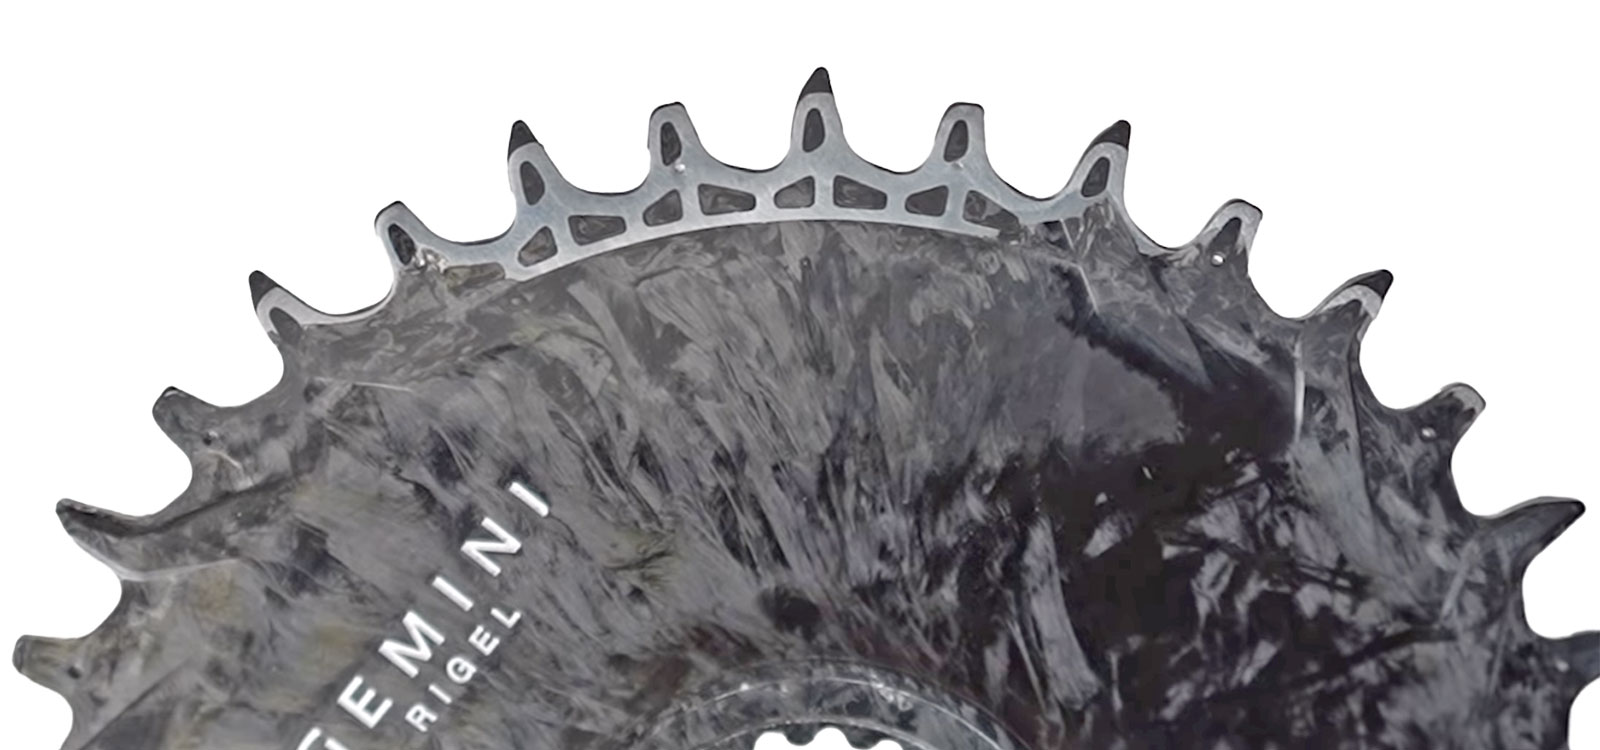 Gemini Rigel ultralight compression molded forged carbon 1x direct mount bike chainrings, prototype with alloy teeth exposed